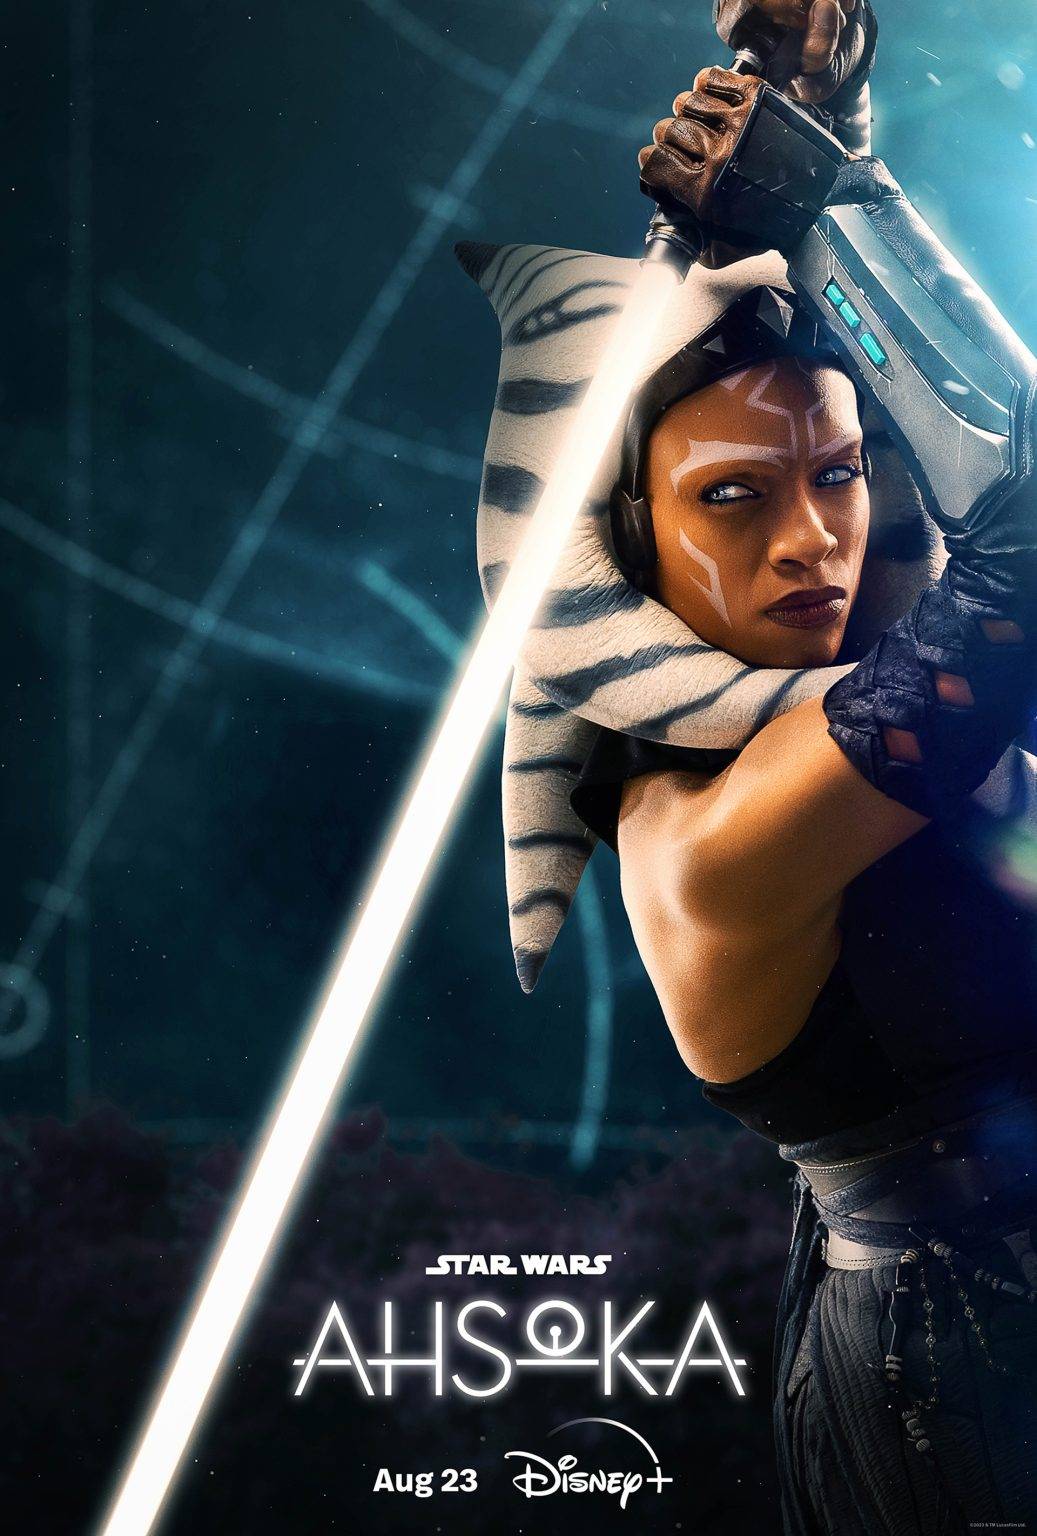 See the latest trailer for 'Star Wars: Ahsoka' coming to Disney+ this summer